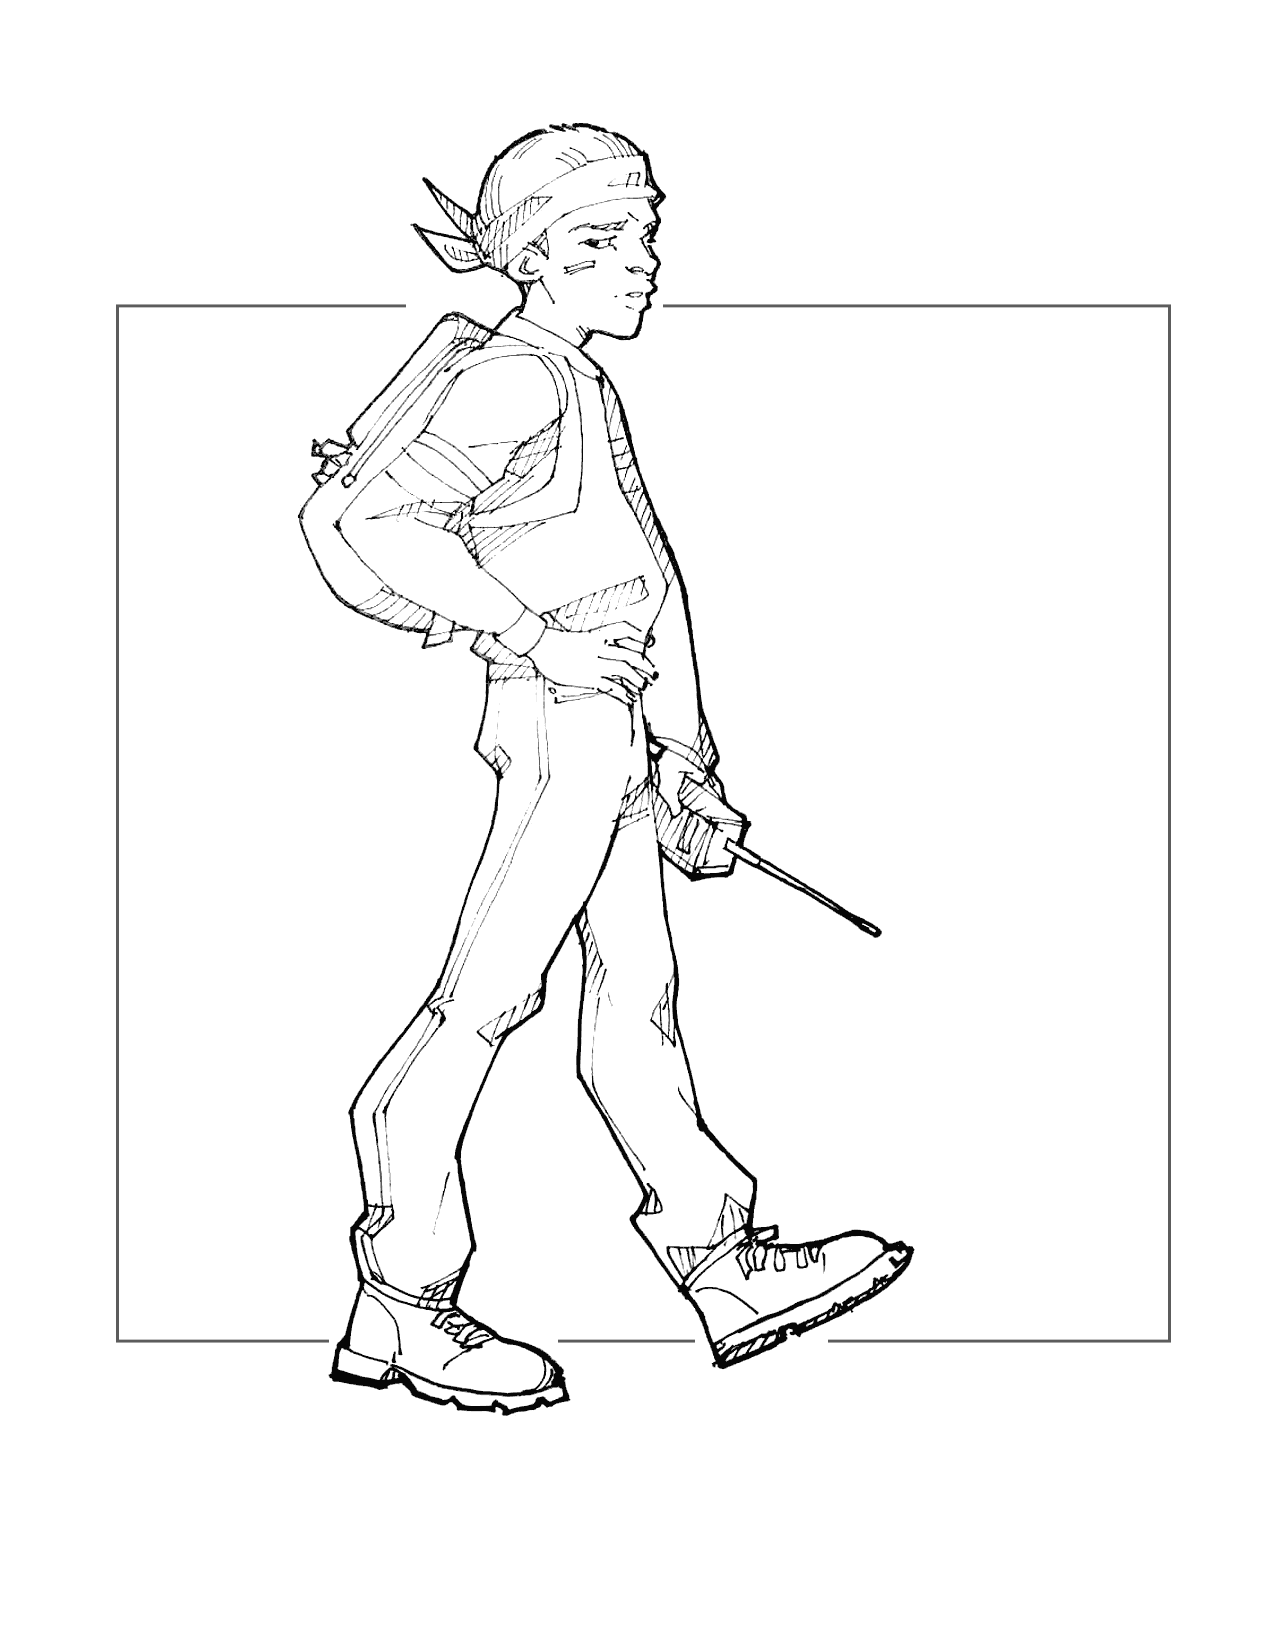 Lucas Stranger Things Coloring Page